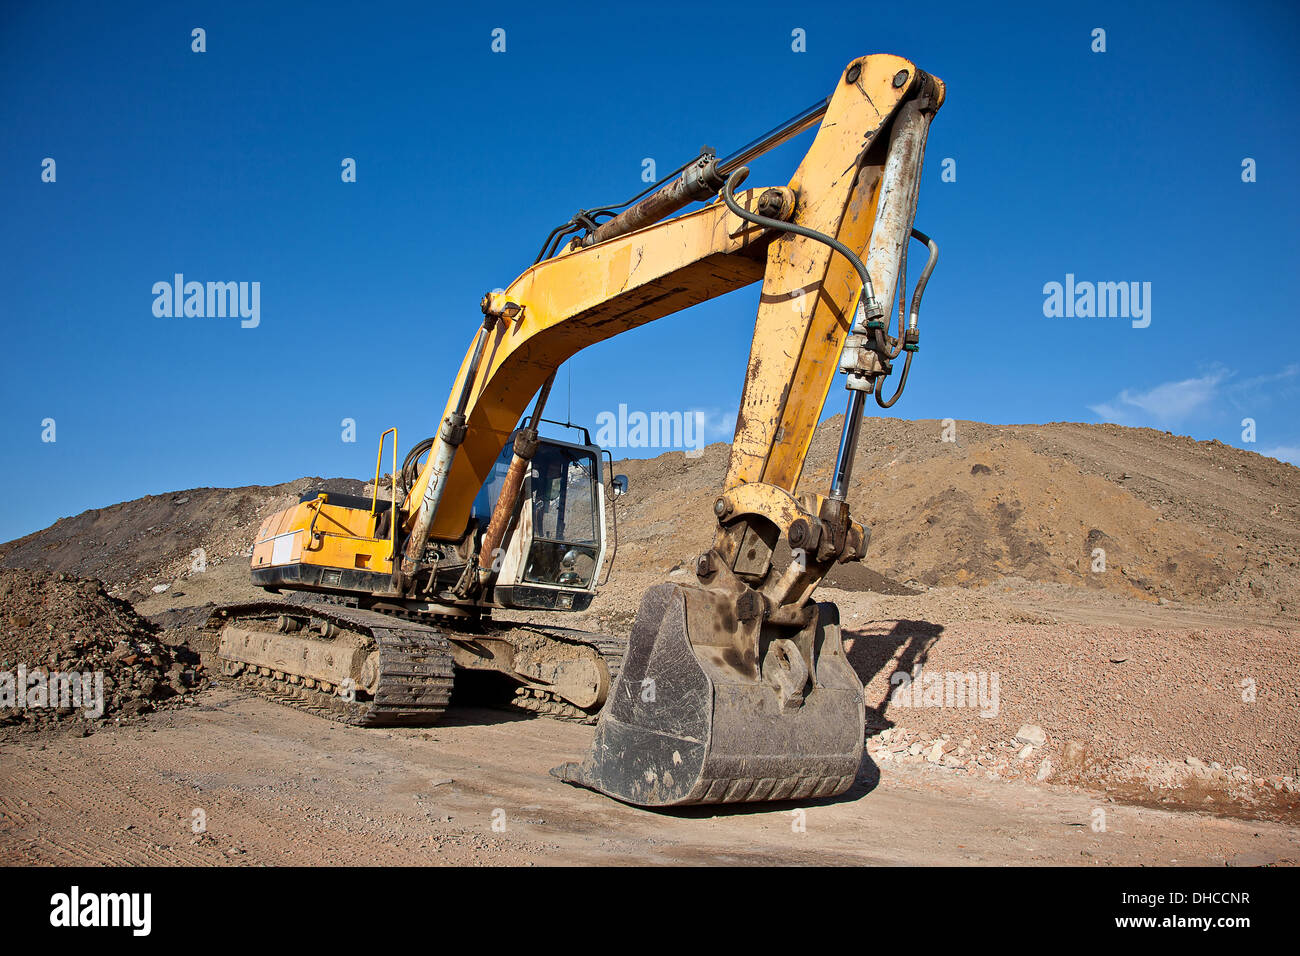 Excavator at a construction site with blue sky Stock Photo